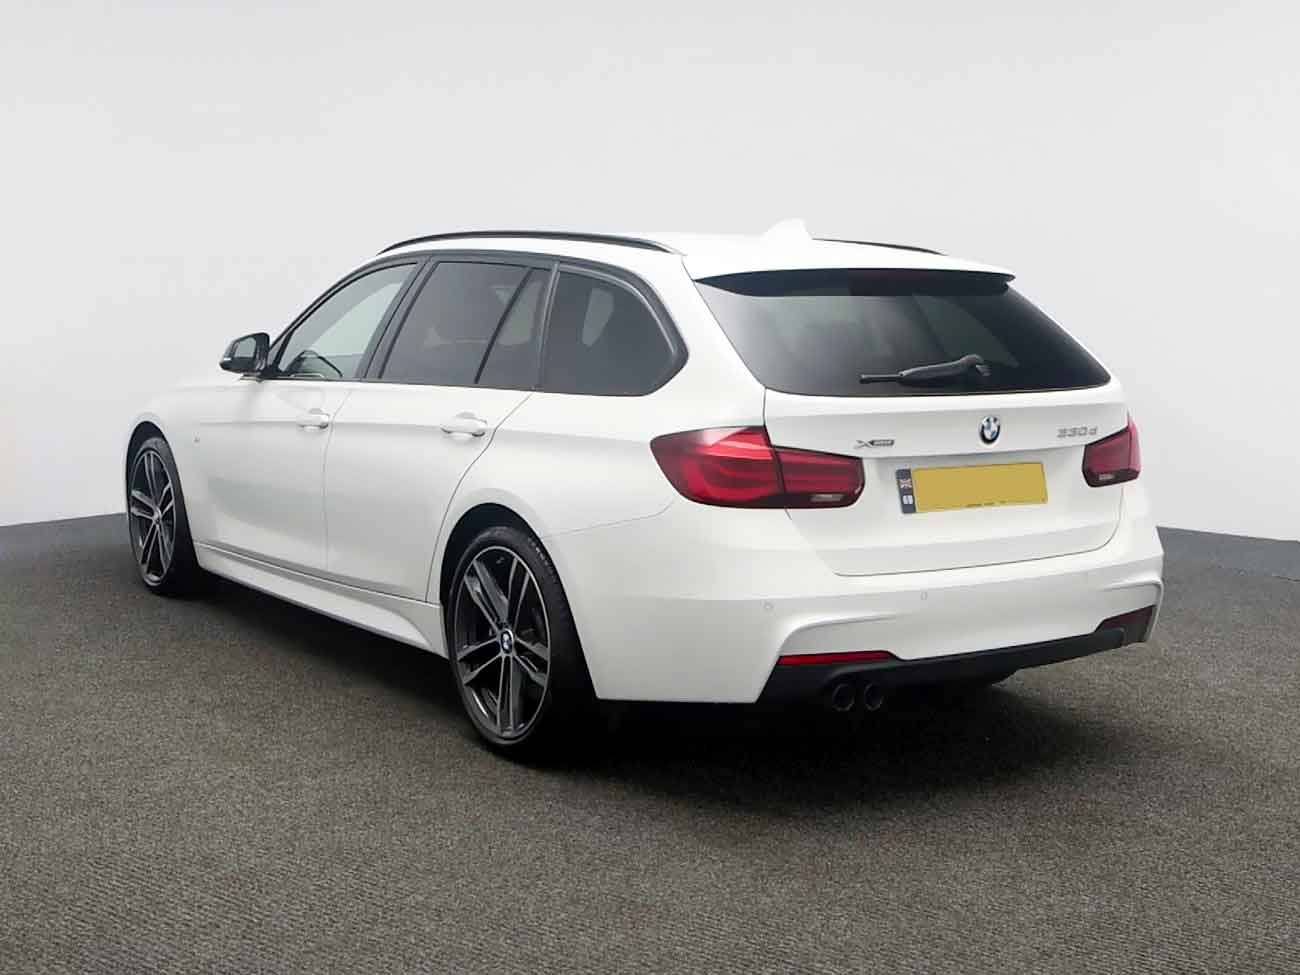 Rear view of Carbase BMW 3 series Touring